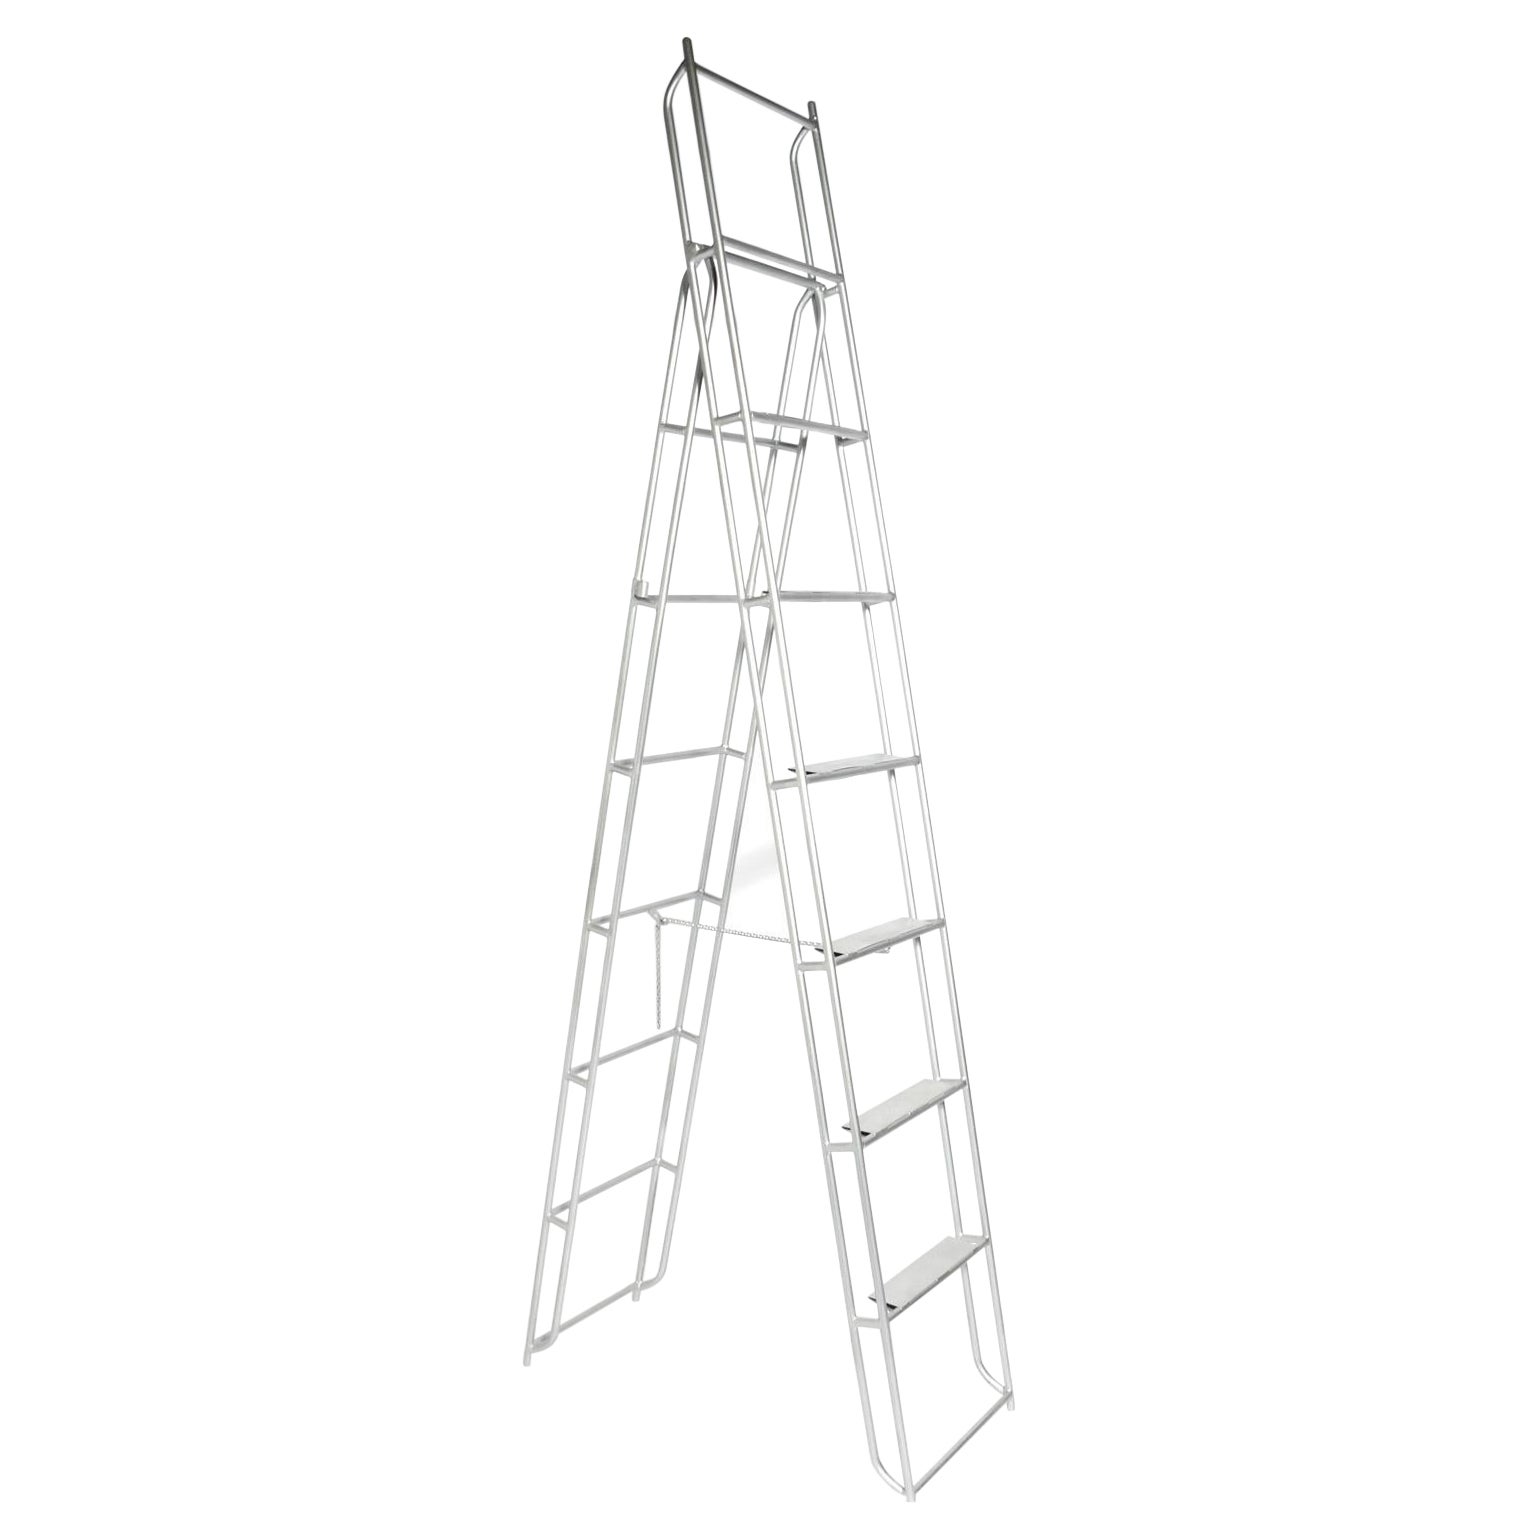 Hand Made Industrial Ladder, circa 1940s